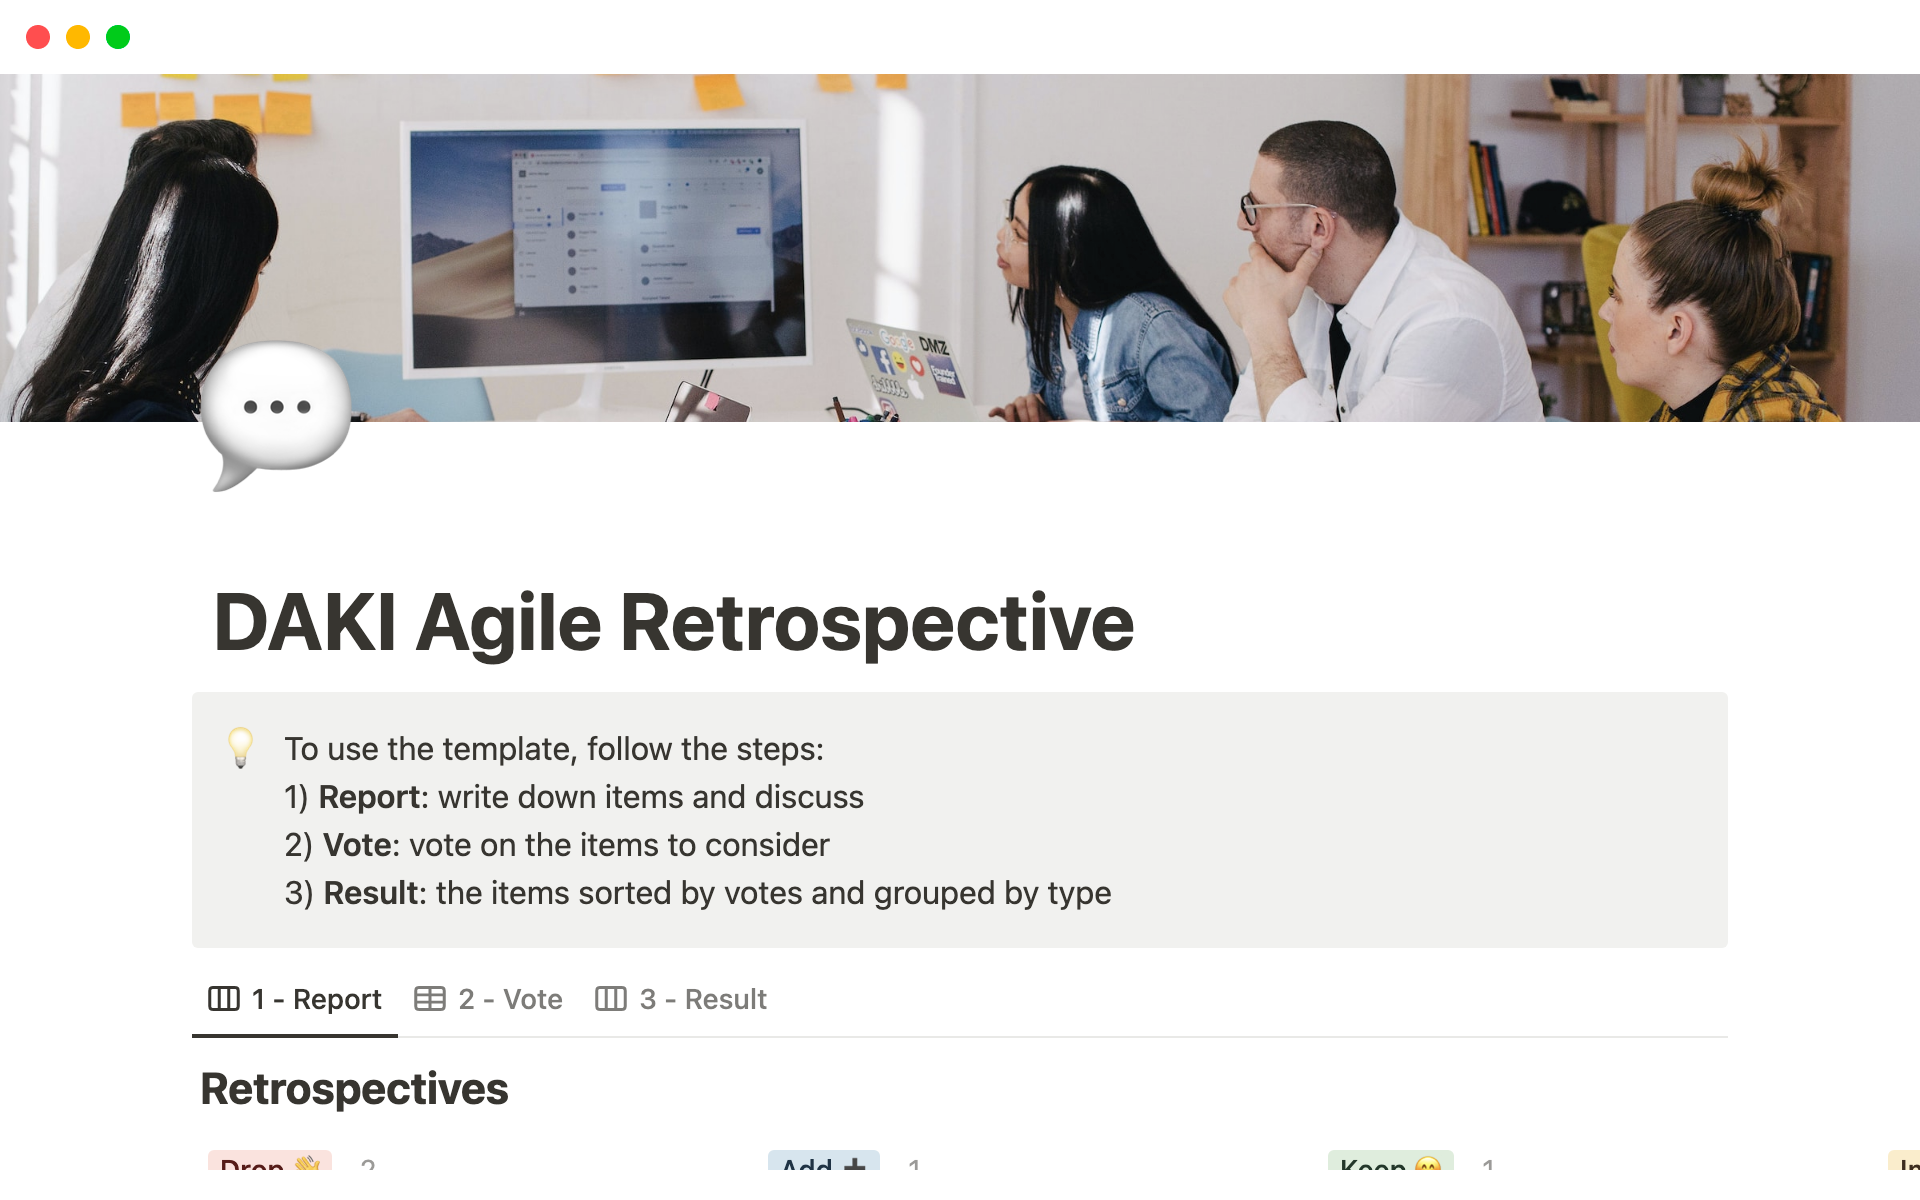 The DAKI Agile Retrospective is a methodology used in agile software development teams to reflect on their performance during a project and identify areas for improvement.